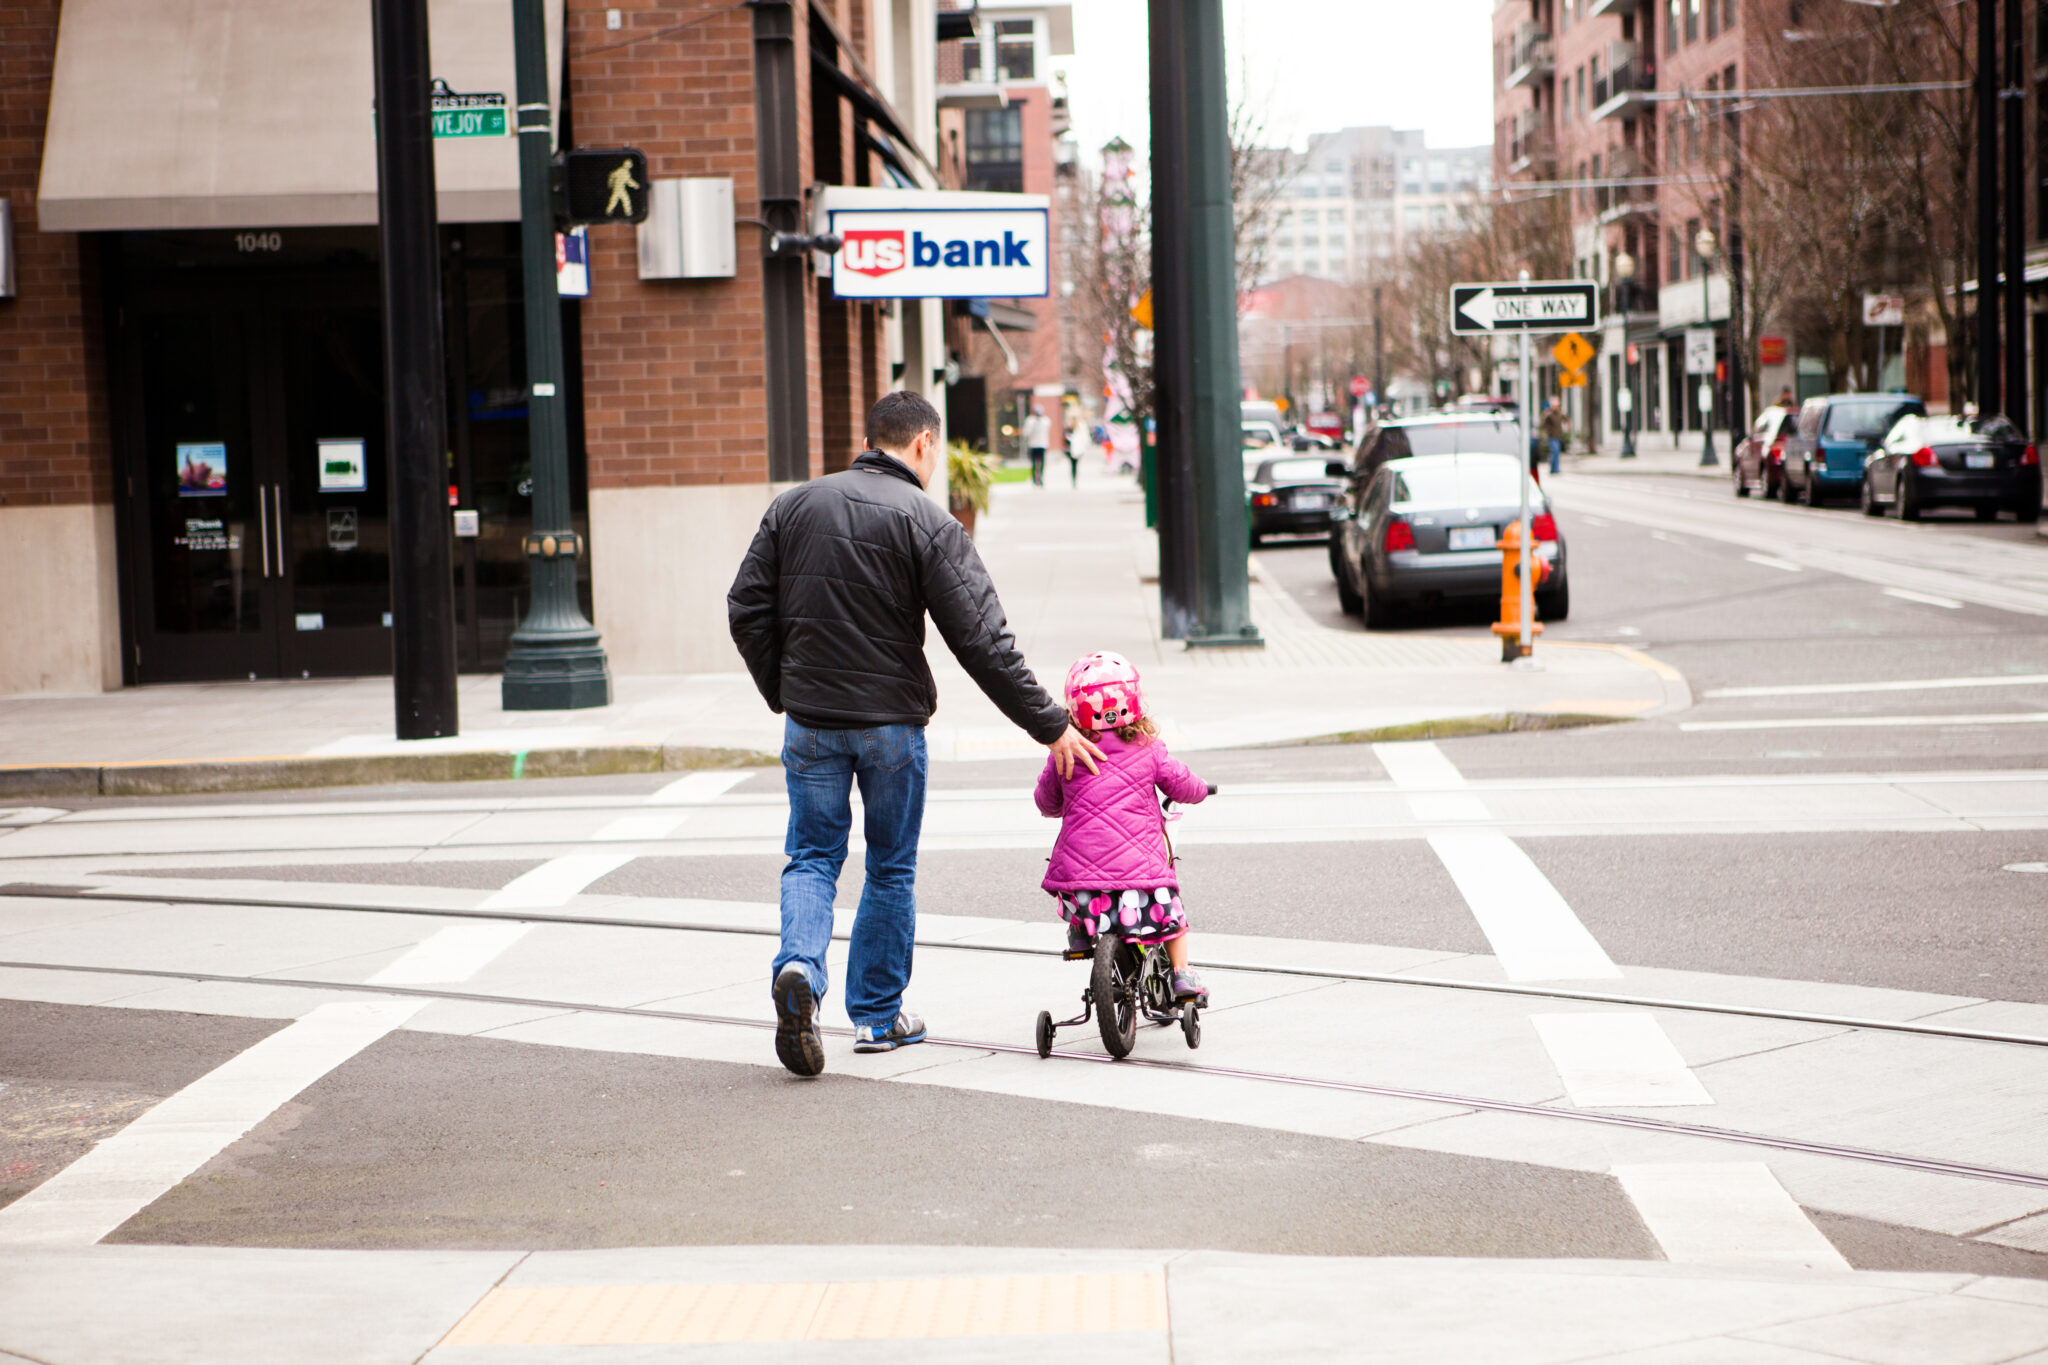 "Portland, Oregon, USA - February 12, 2012: A man helps his daughter across the street as she rides her bicycle with training wheels in the Pearl district of Portland."